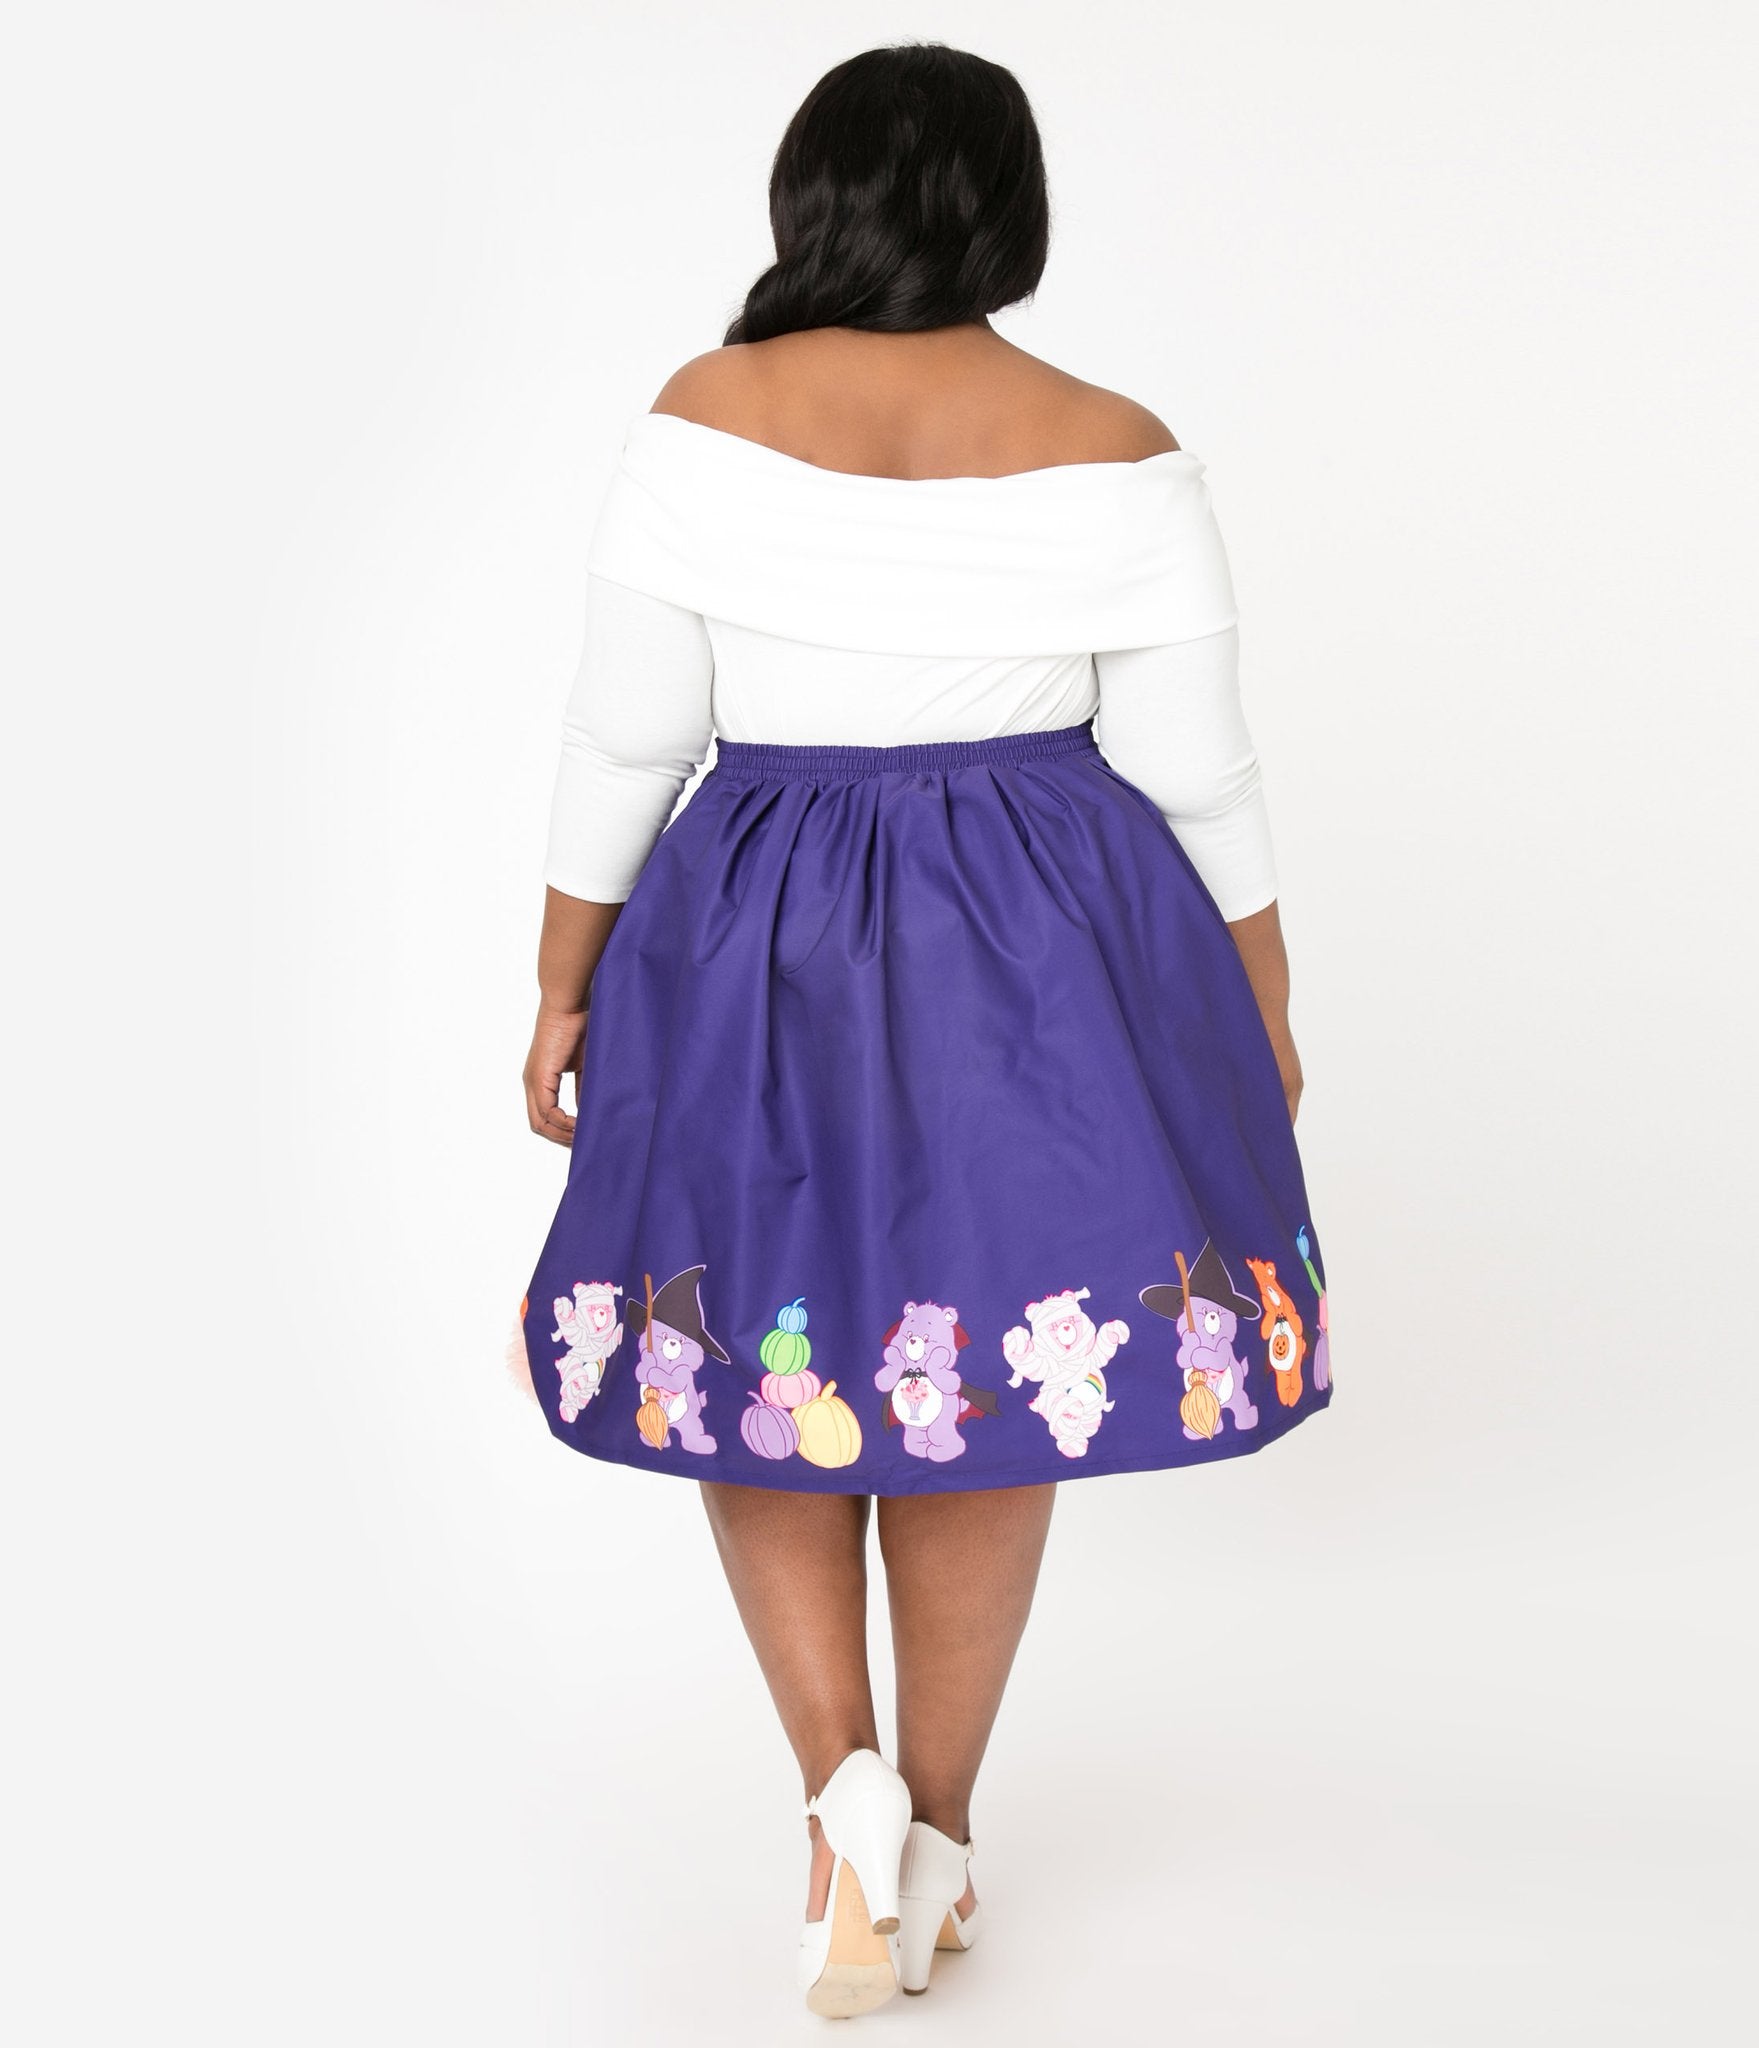 This is a Care Bears halloween purple Jayne swing skirt by Unique Vintage and the plus model is wearing a white shirt and has on white shoes and her dark hair is to the side.